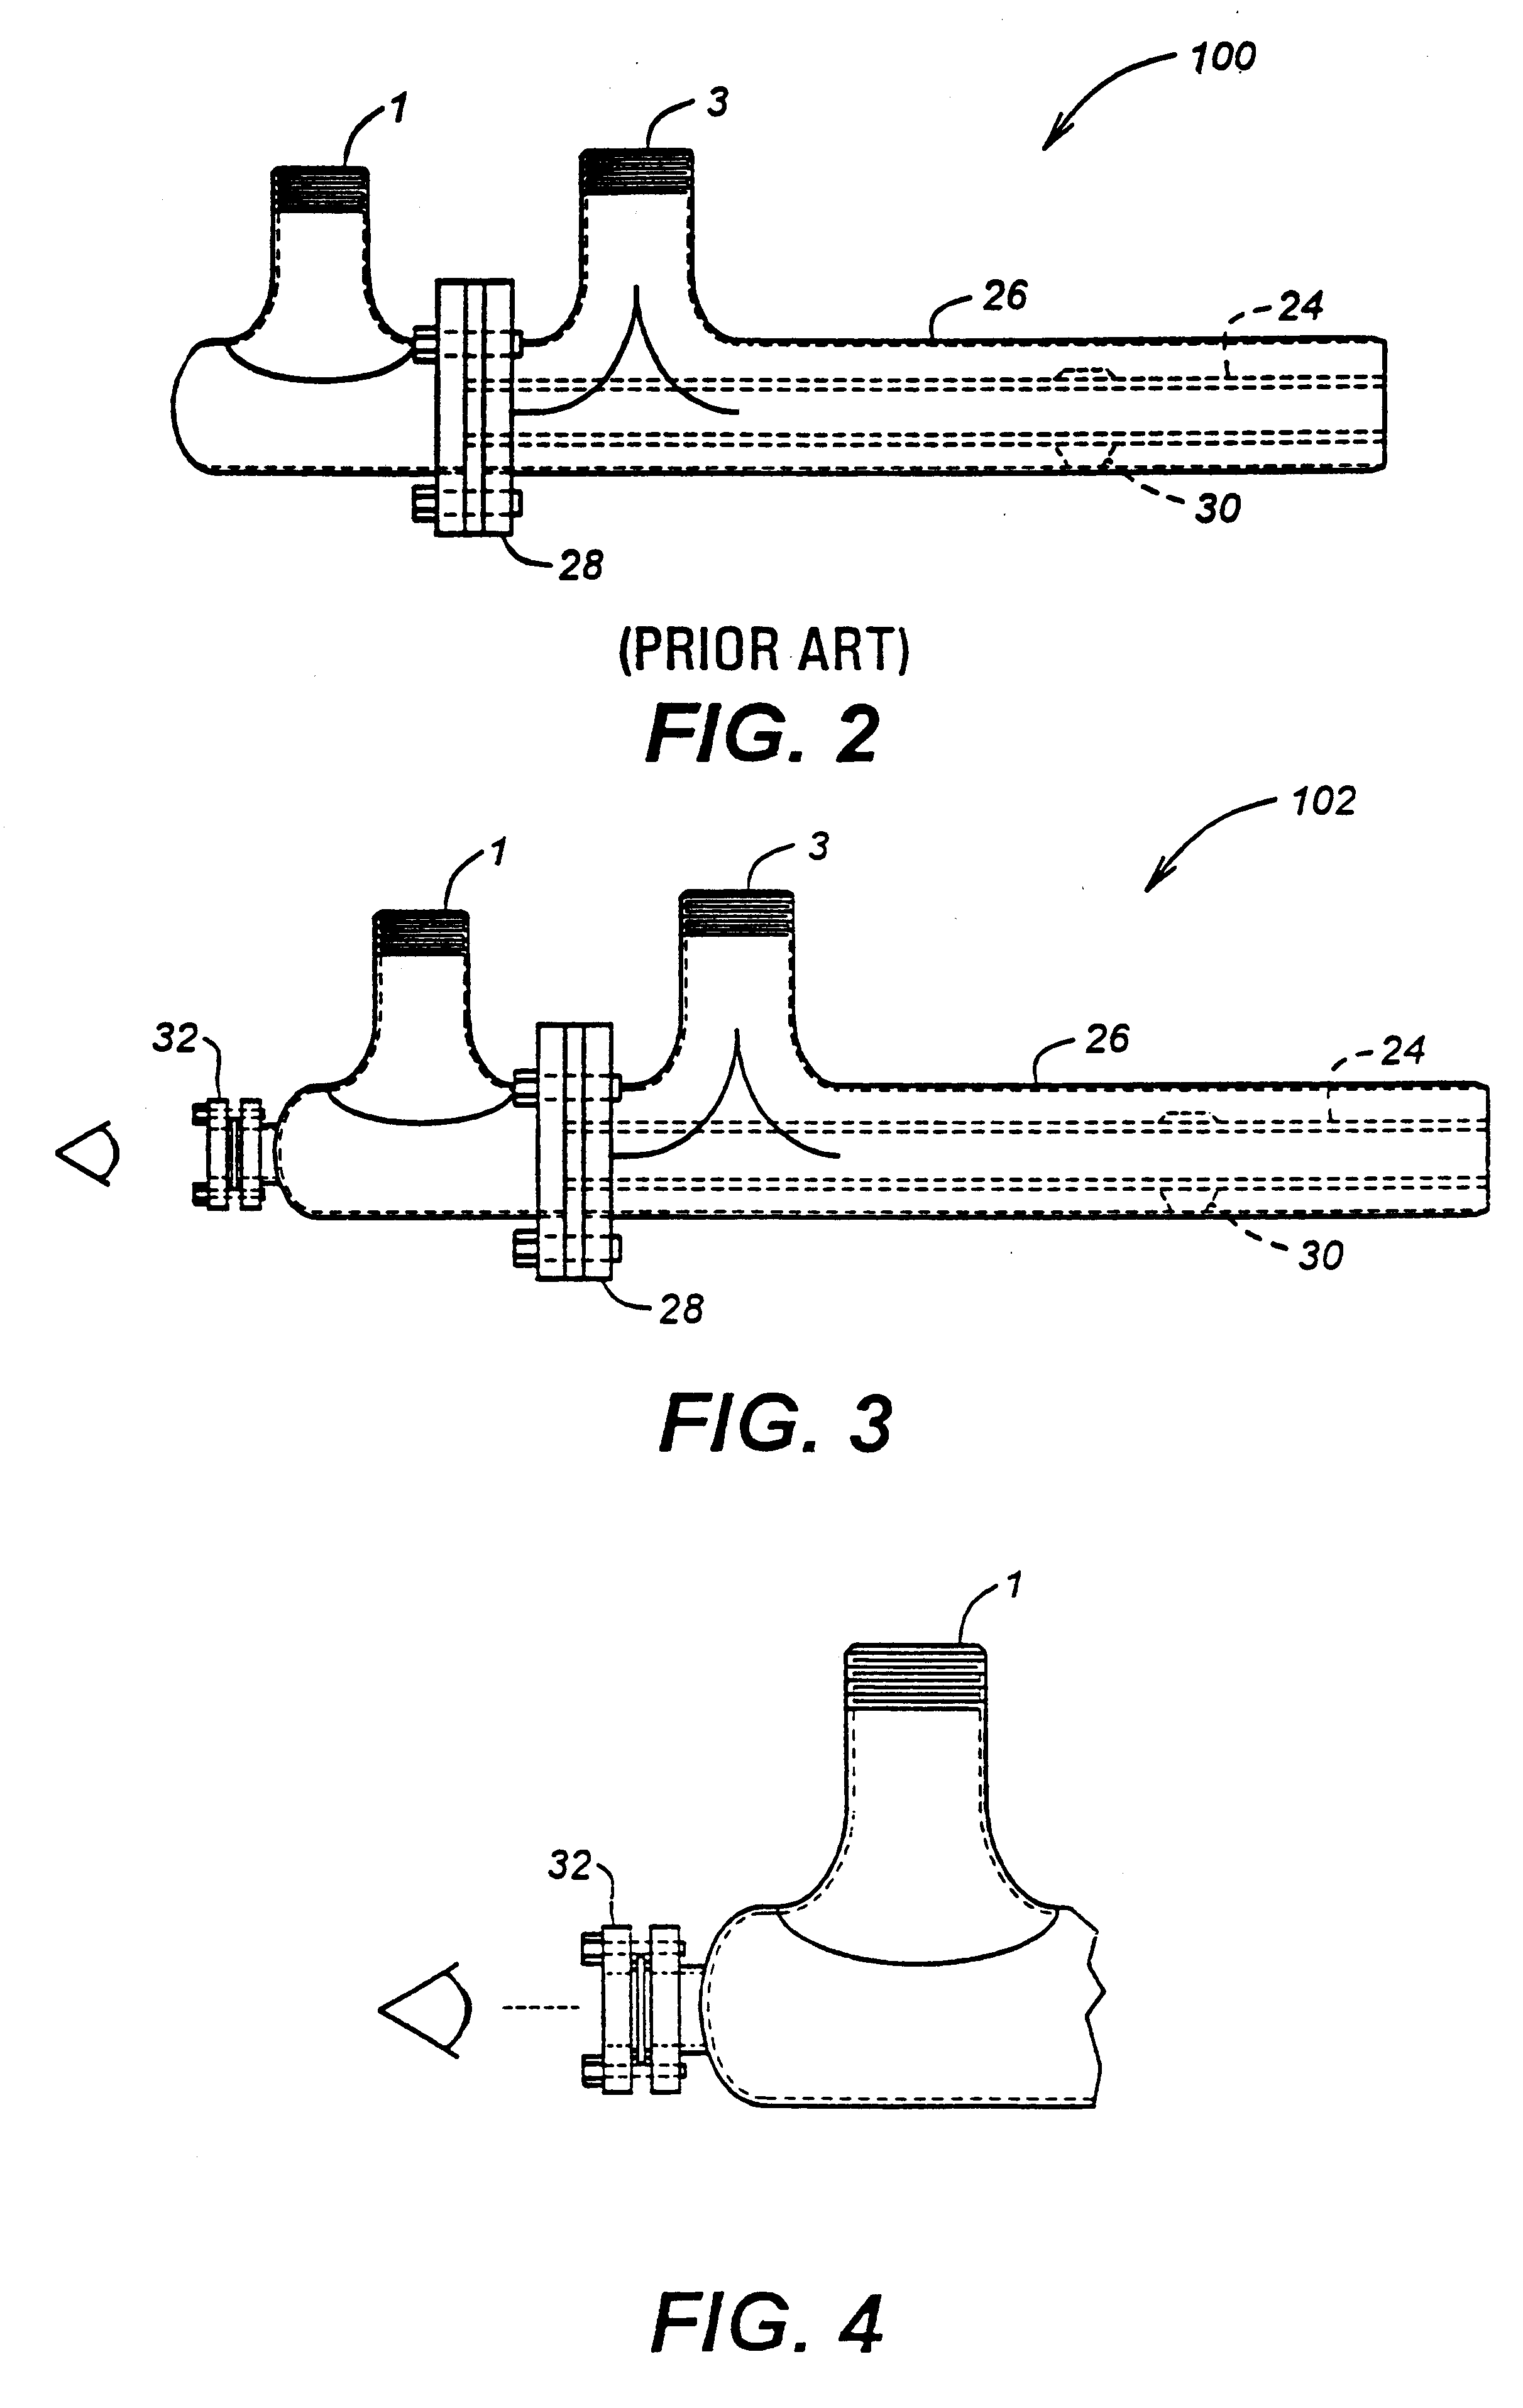 Method and apparatus for optical flame control of combustion burners